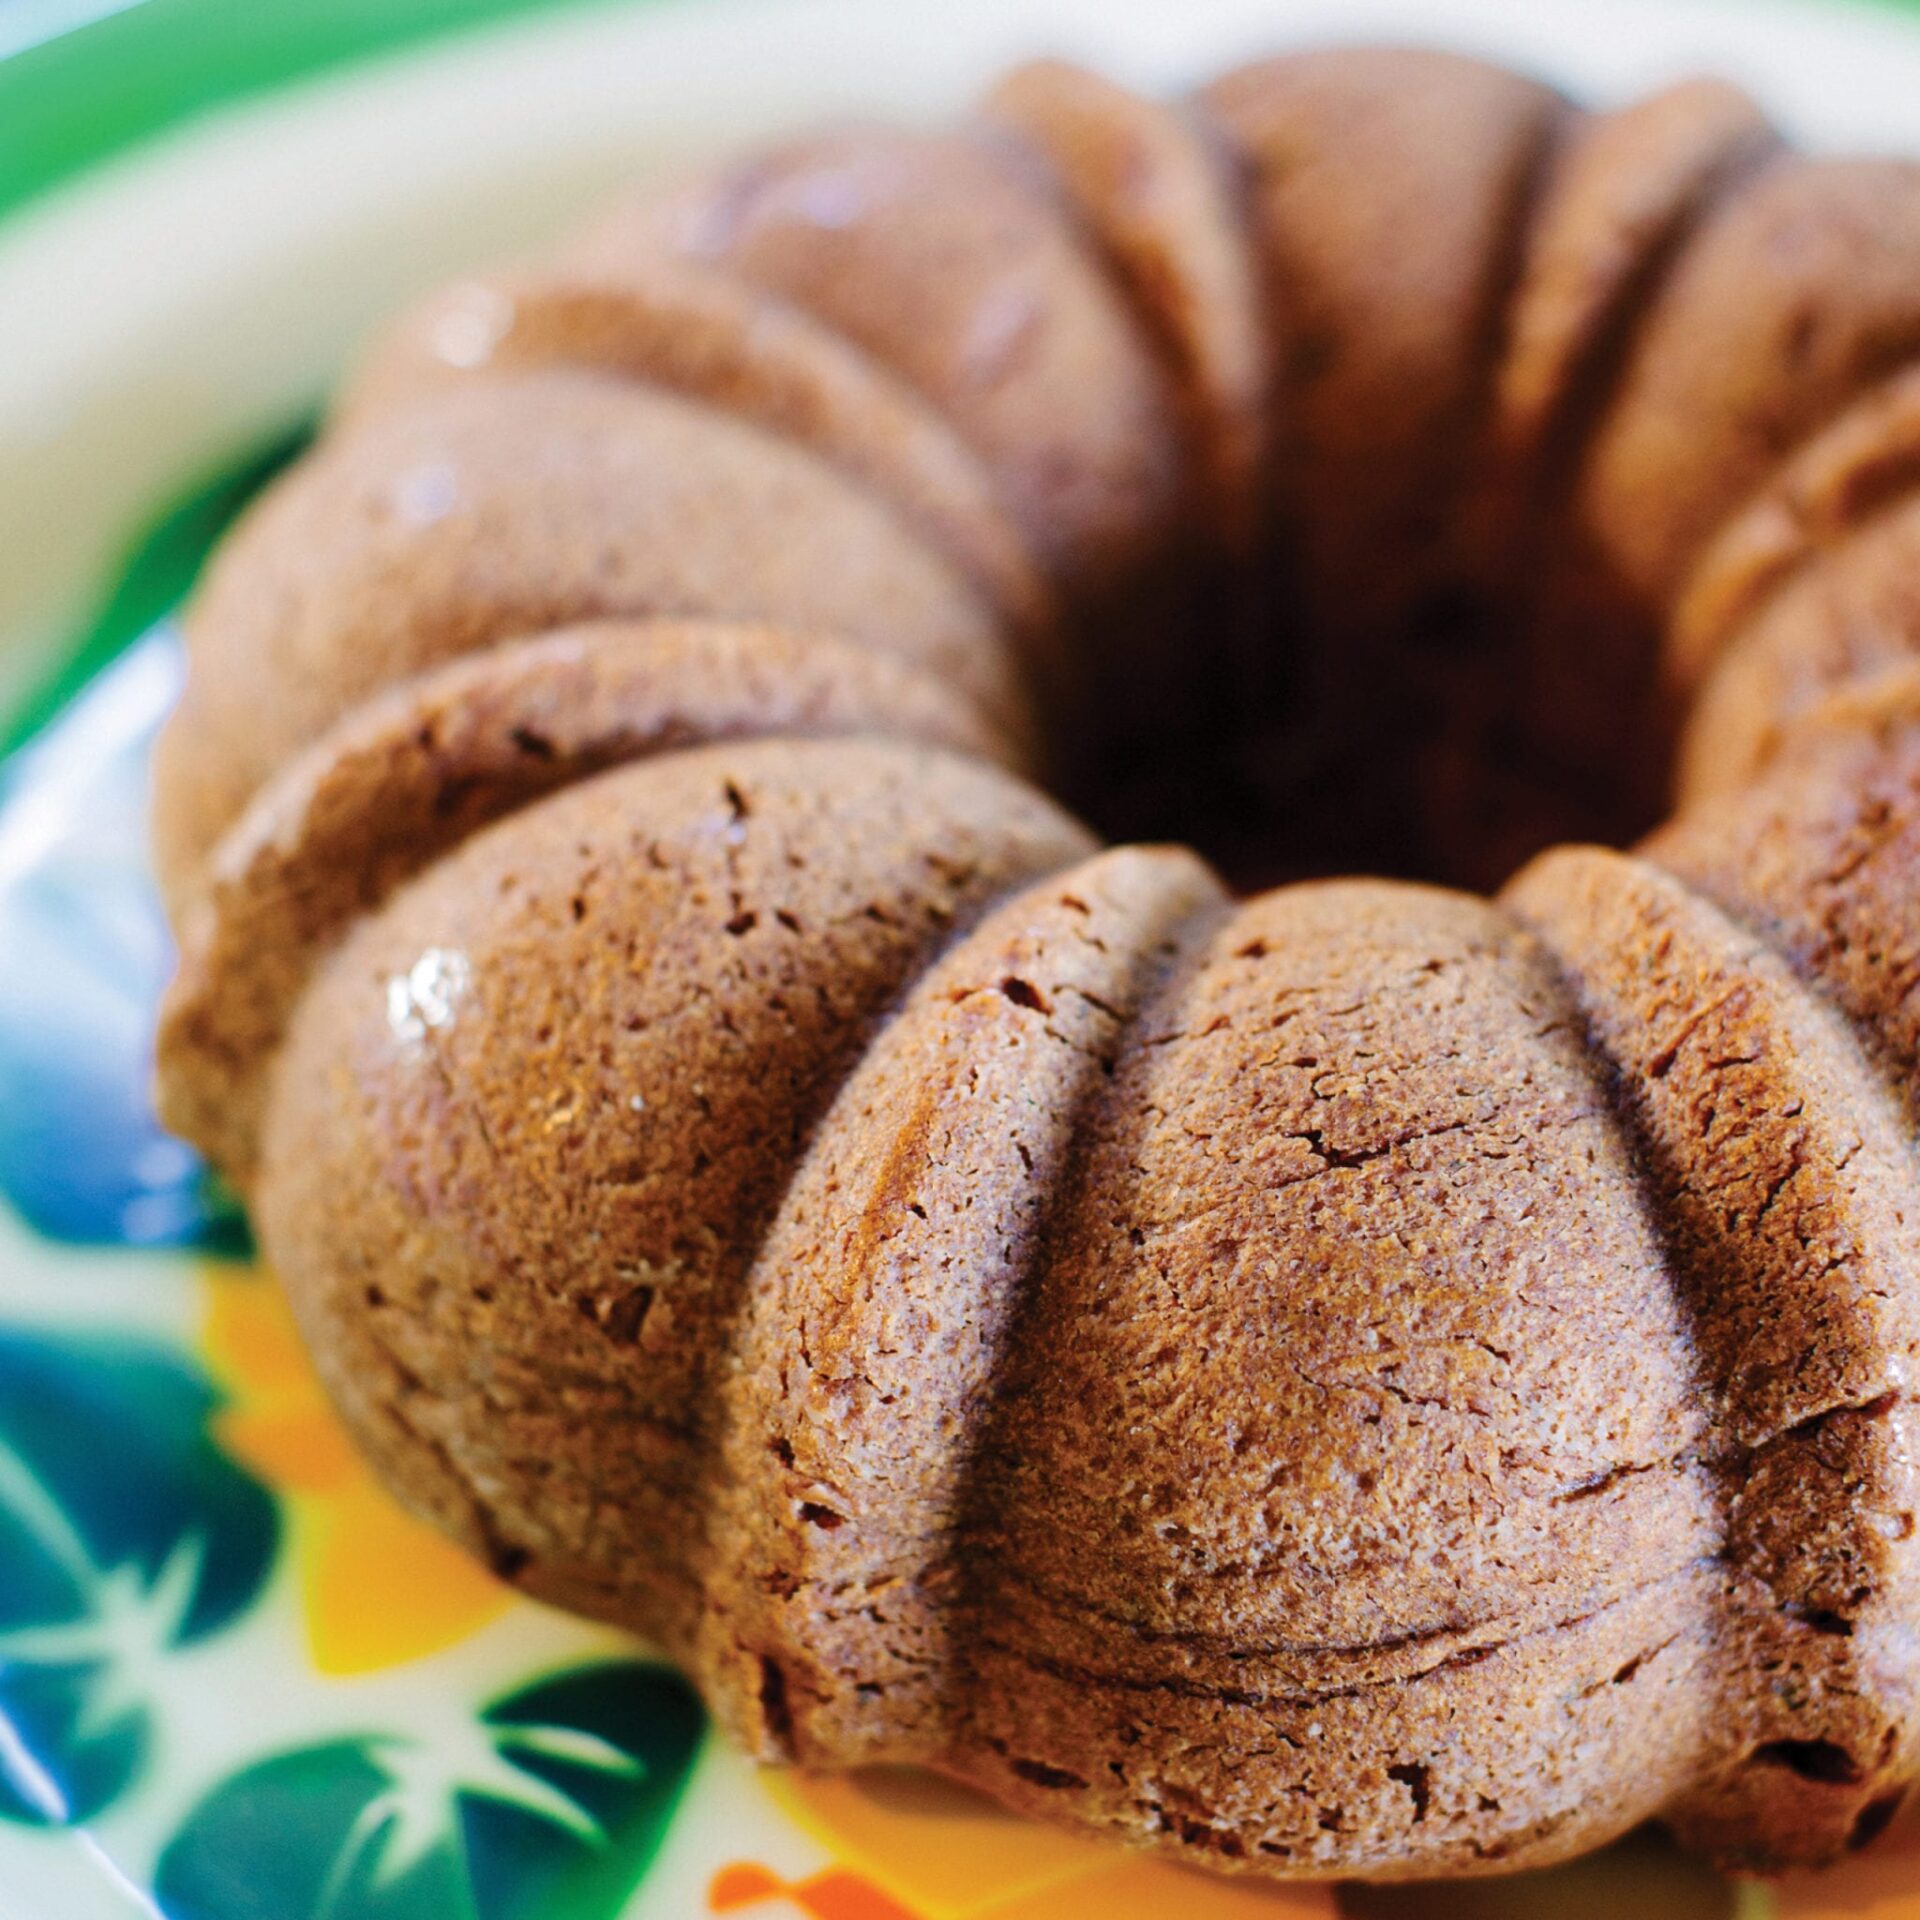 Persimmon Pound Cake from Chef Bill Smith of Crook's Corner